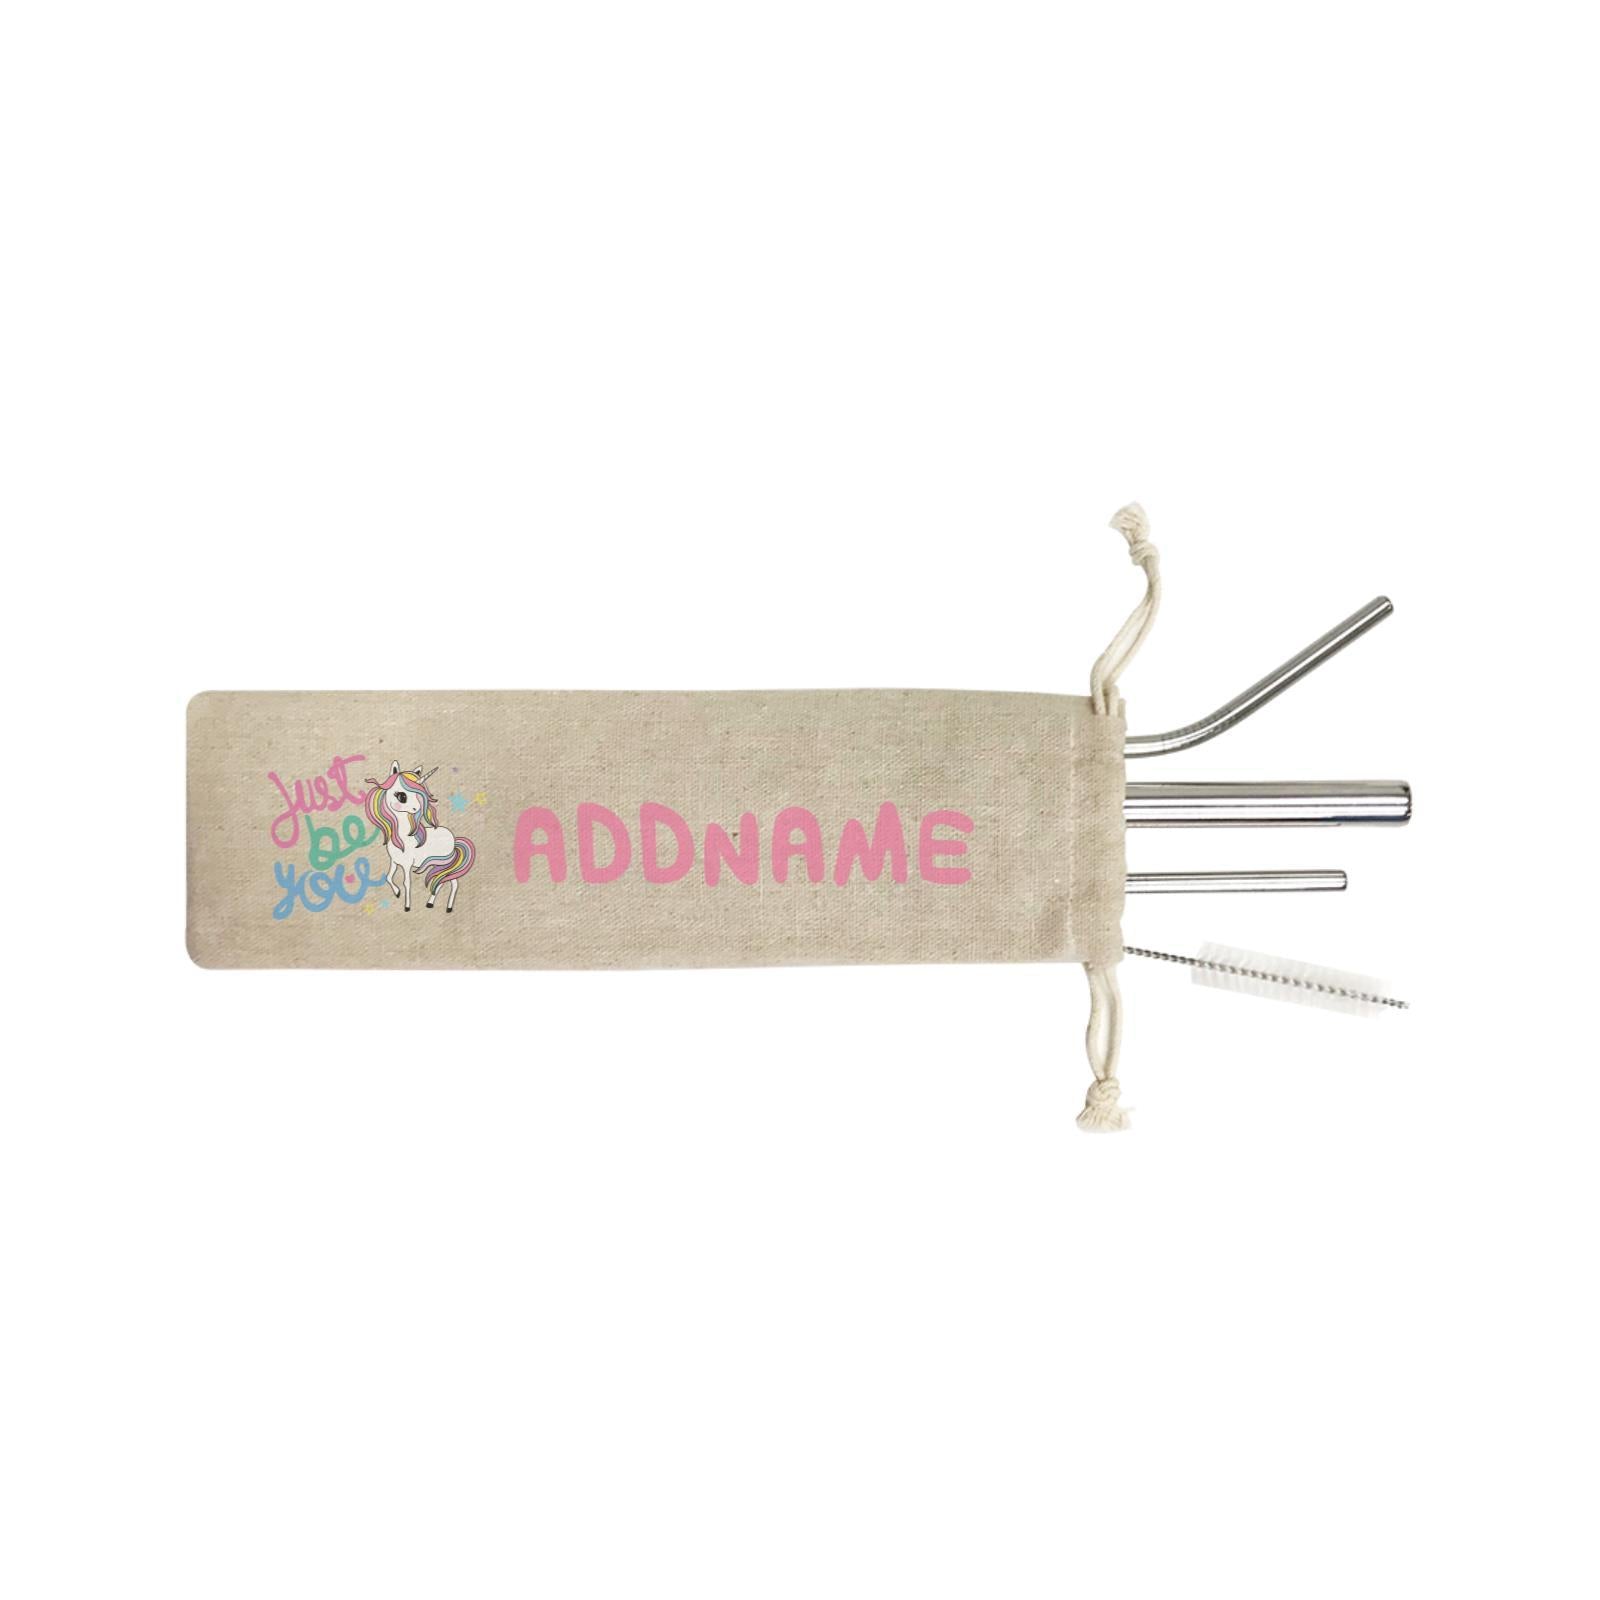 Children's Day Gift Series Just Be You Cute Unicorn Addname SB 4-in-1 Stainless Steel Straw Set In a Satchel